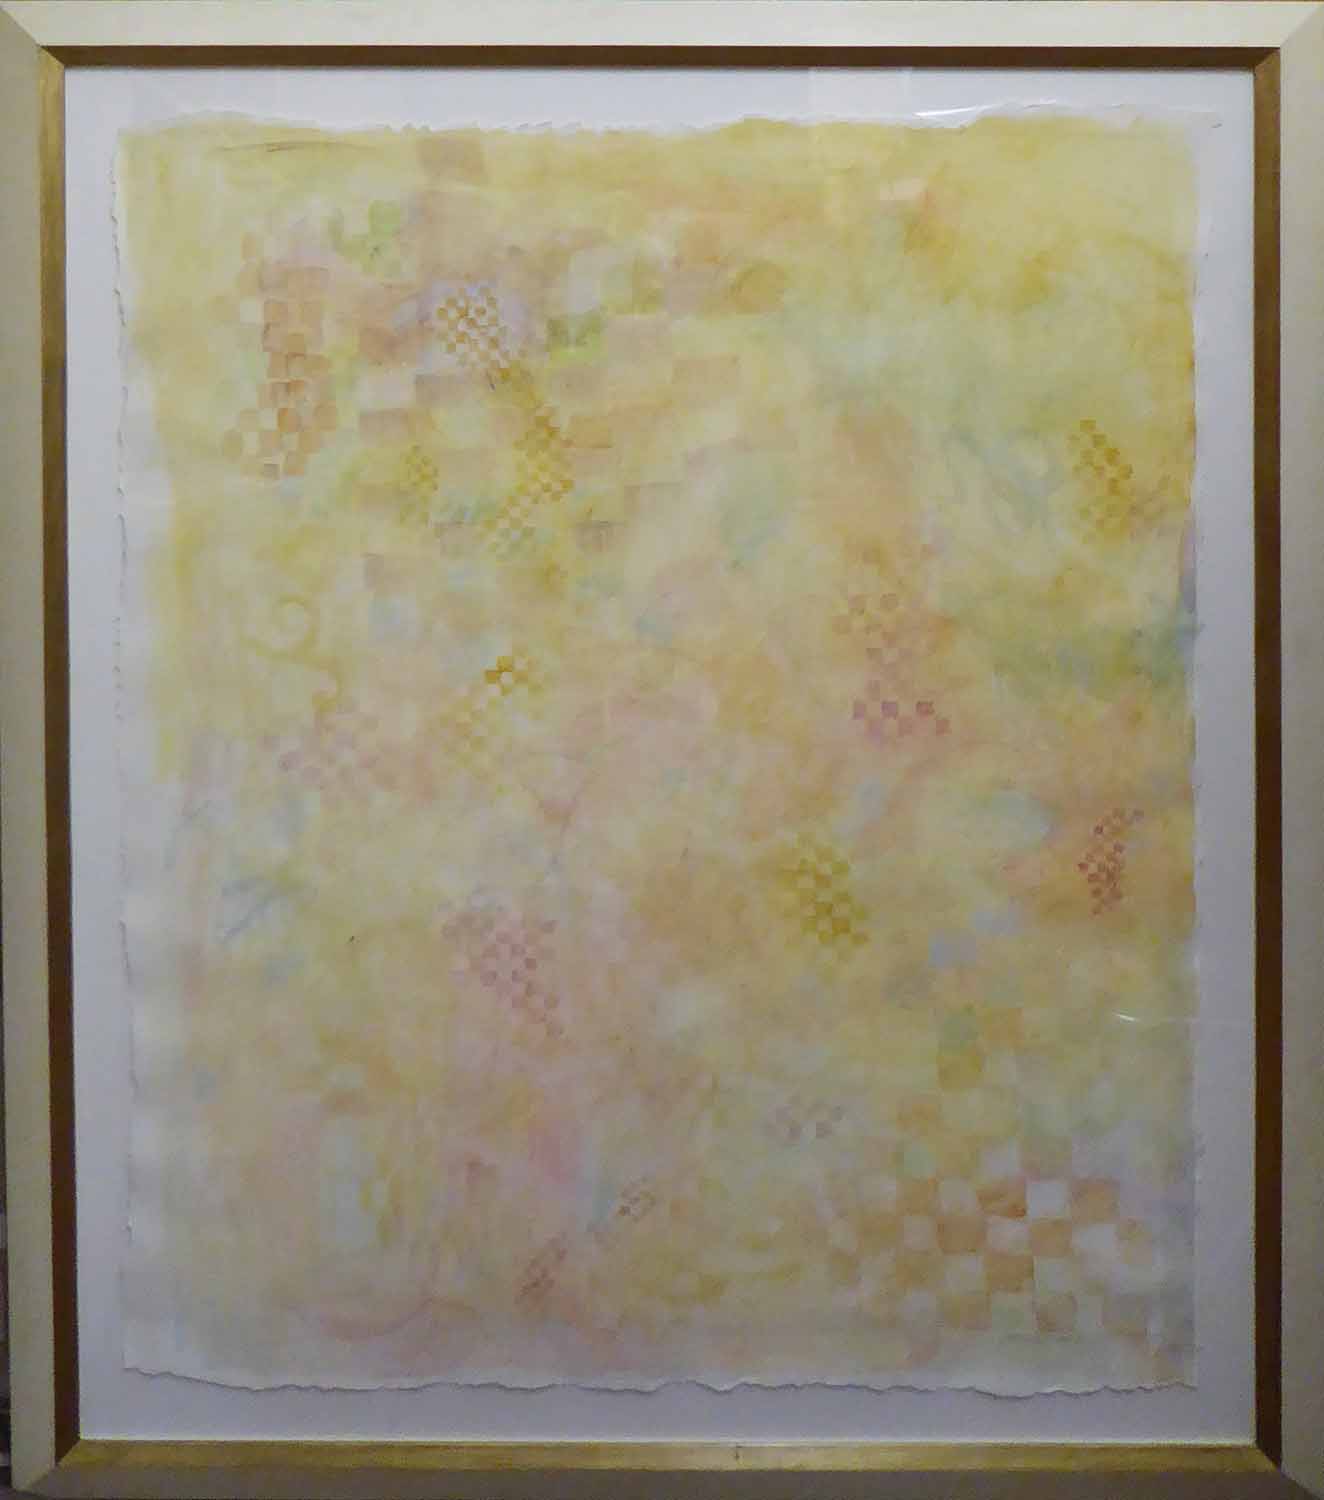 ATASSI 'Abstract', 2003, watercolour, signed and dated lower right, 187cm x 150cm overall,